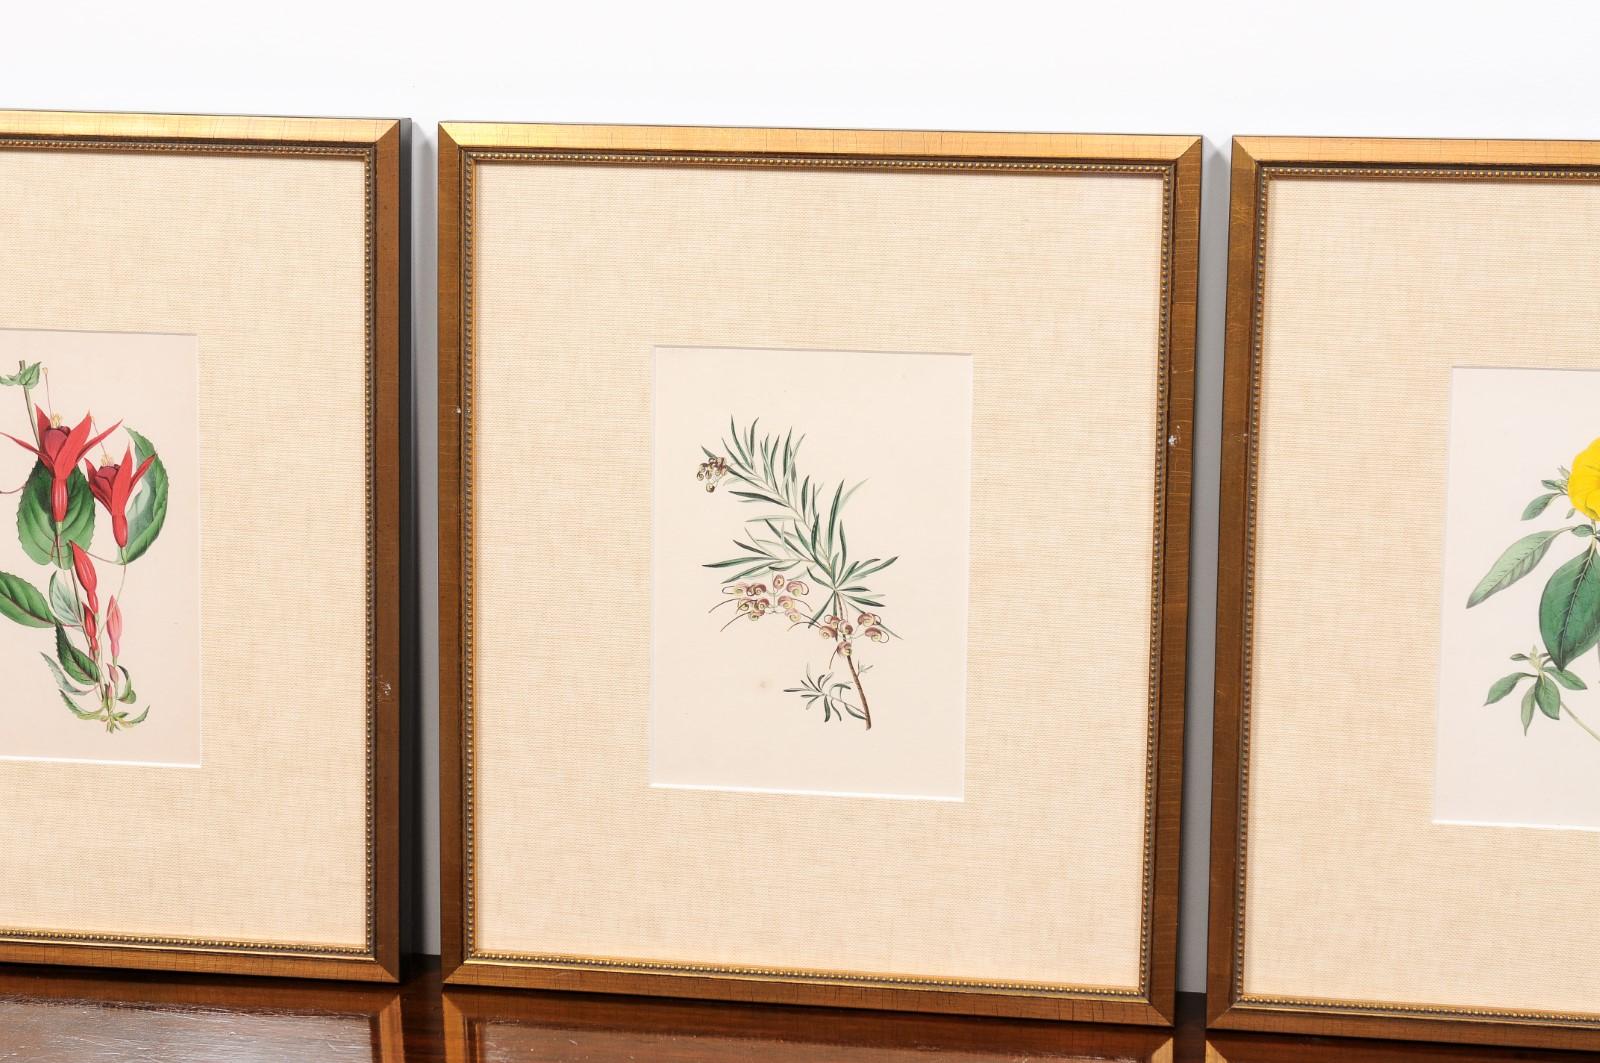  Victorian Floral Prints from The Museum of Flowers by Mary Elizabeth Rosenberg For Sale 2